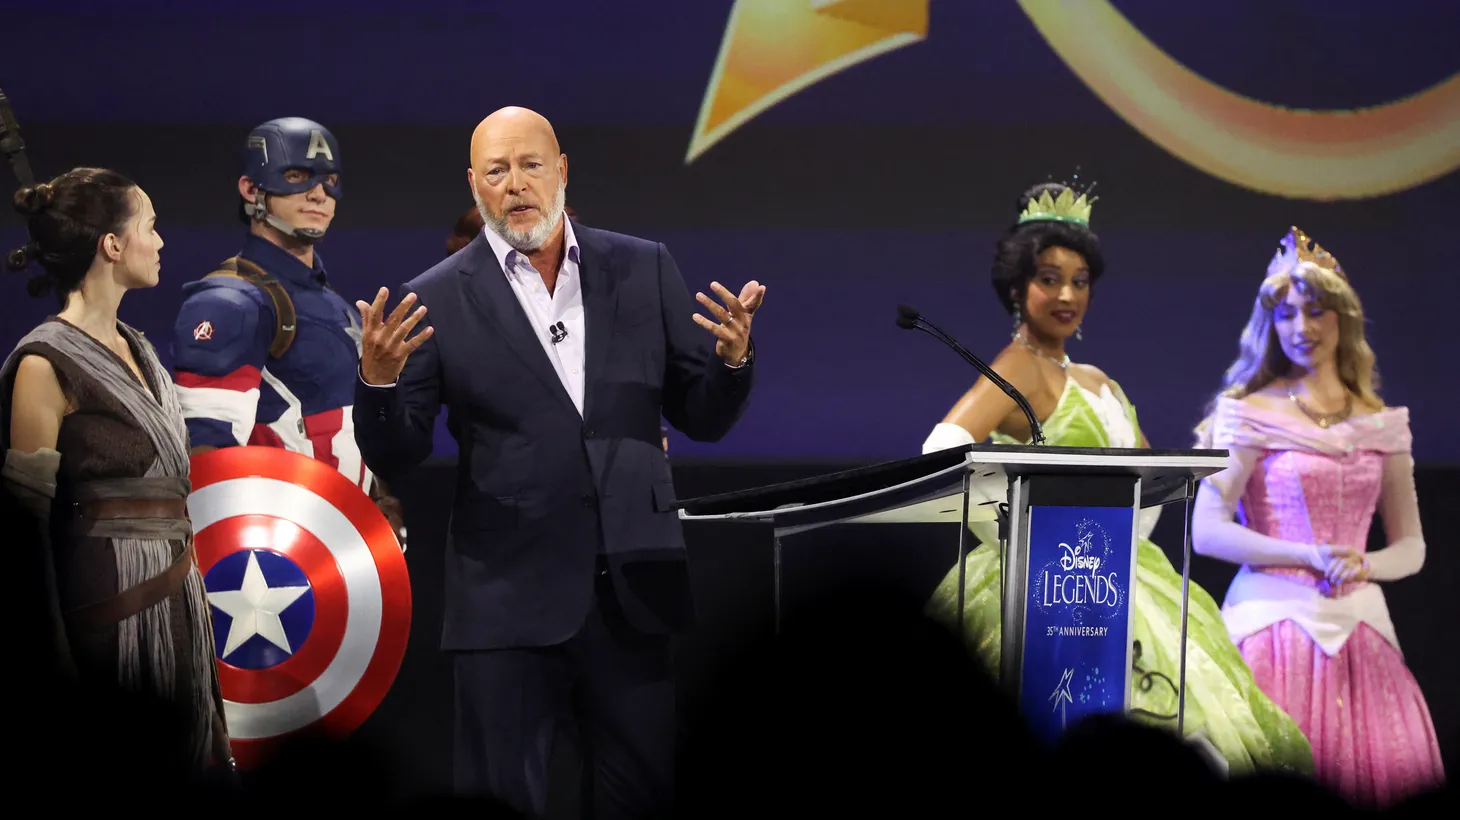 Bob Chapek, Chief Executive Officer of Disney, speaks at the 2022 Disney Legends Awards during the D23 Expo in Anaheim, California, on September 9, 2022.